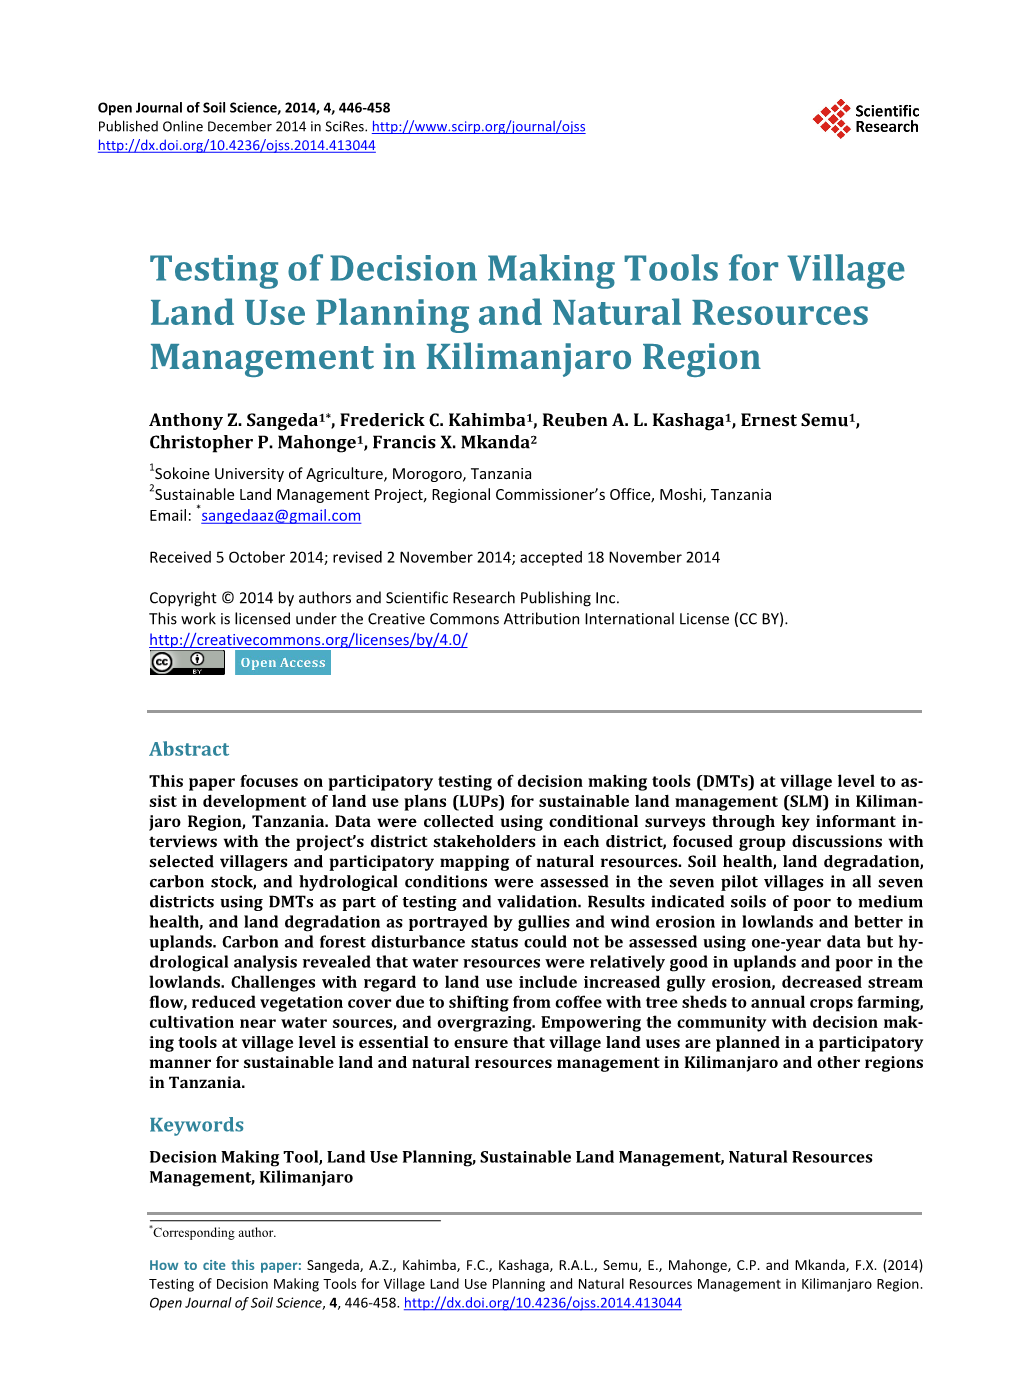 Testing of Decision Making Tools for Village Land Use Planning and Natural Resources Management in Kilimanjaro Region